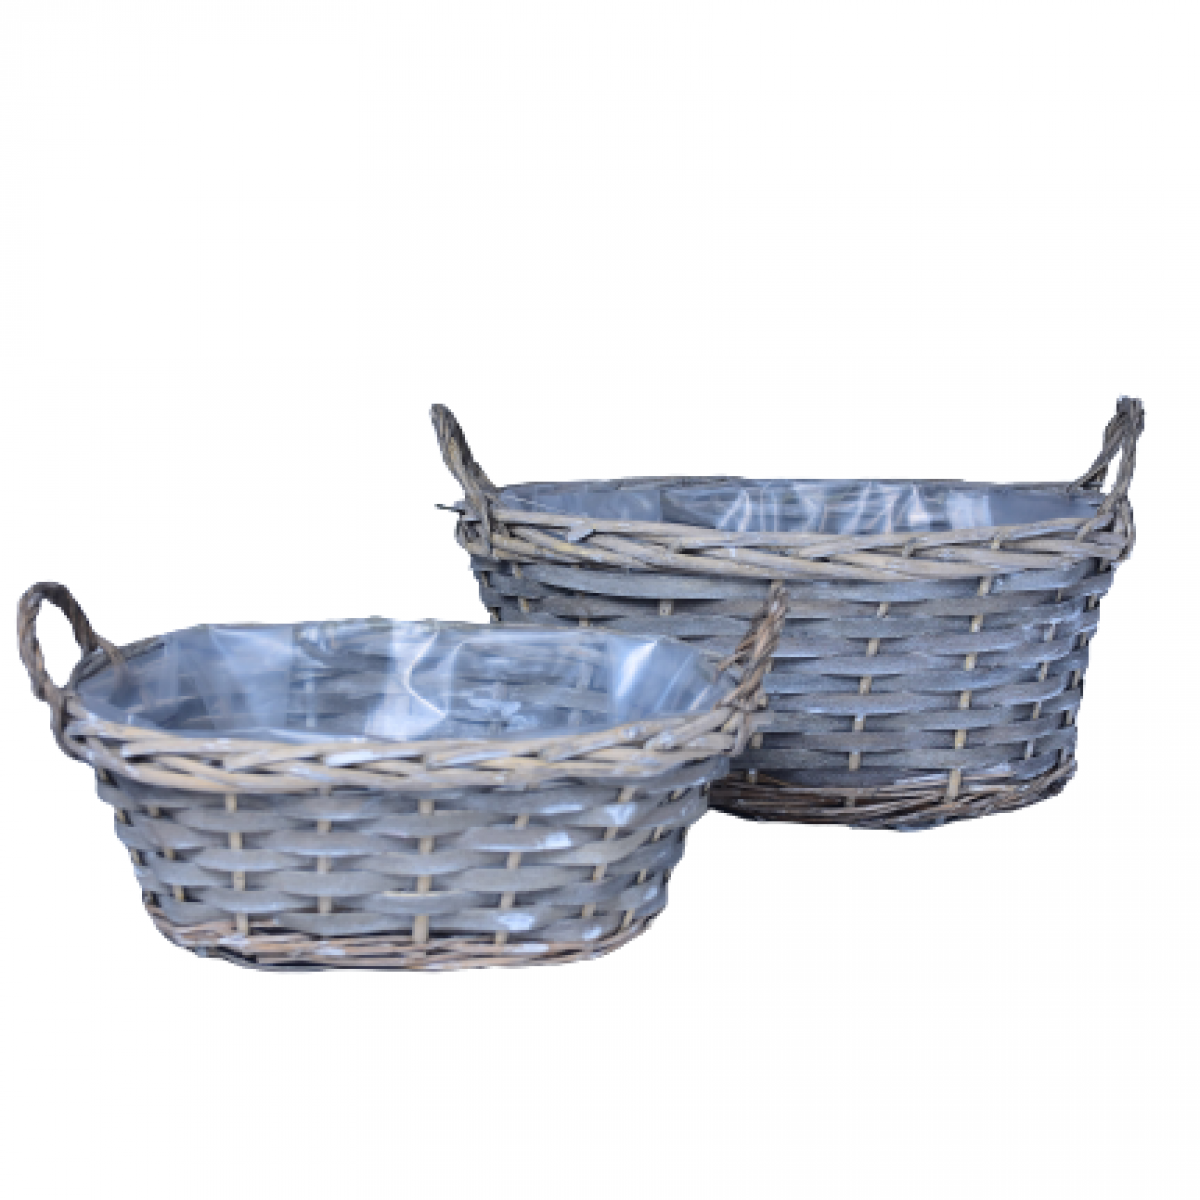 5515 Boston Oval Tray Grey Willow Basket with Handle (Set of 2)